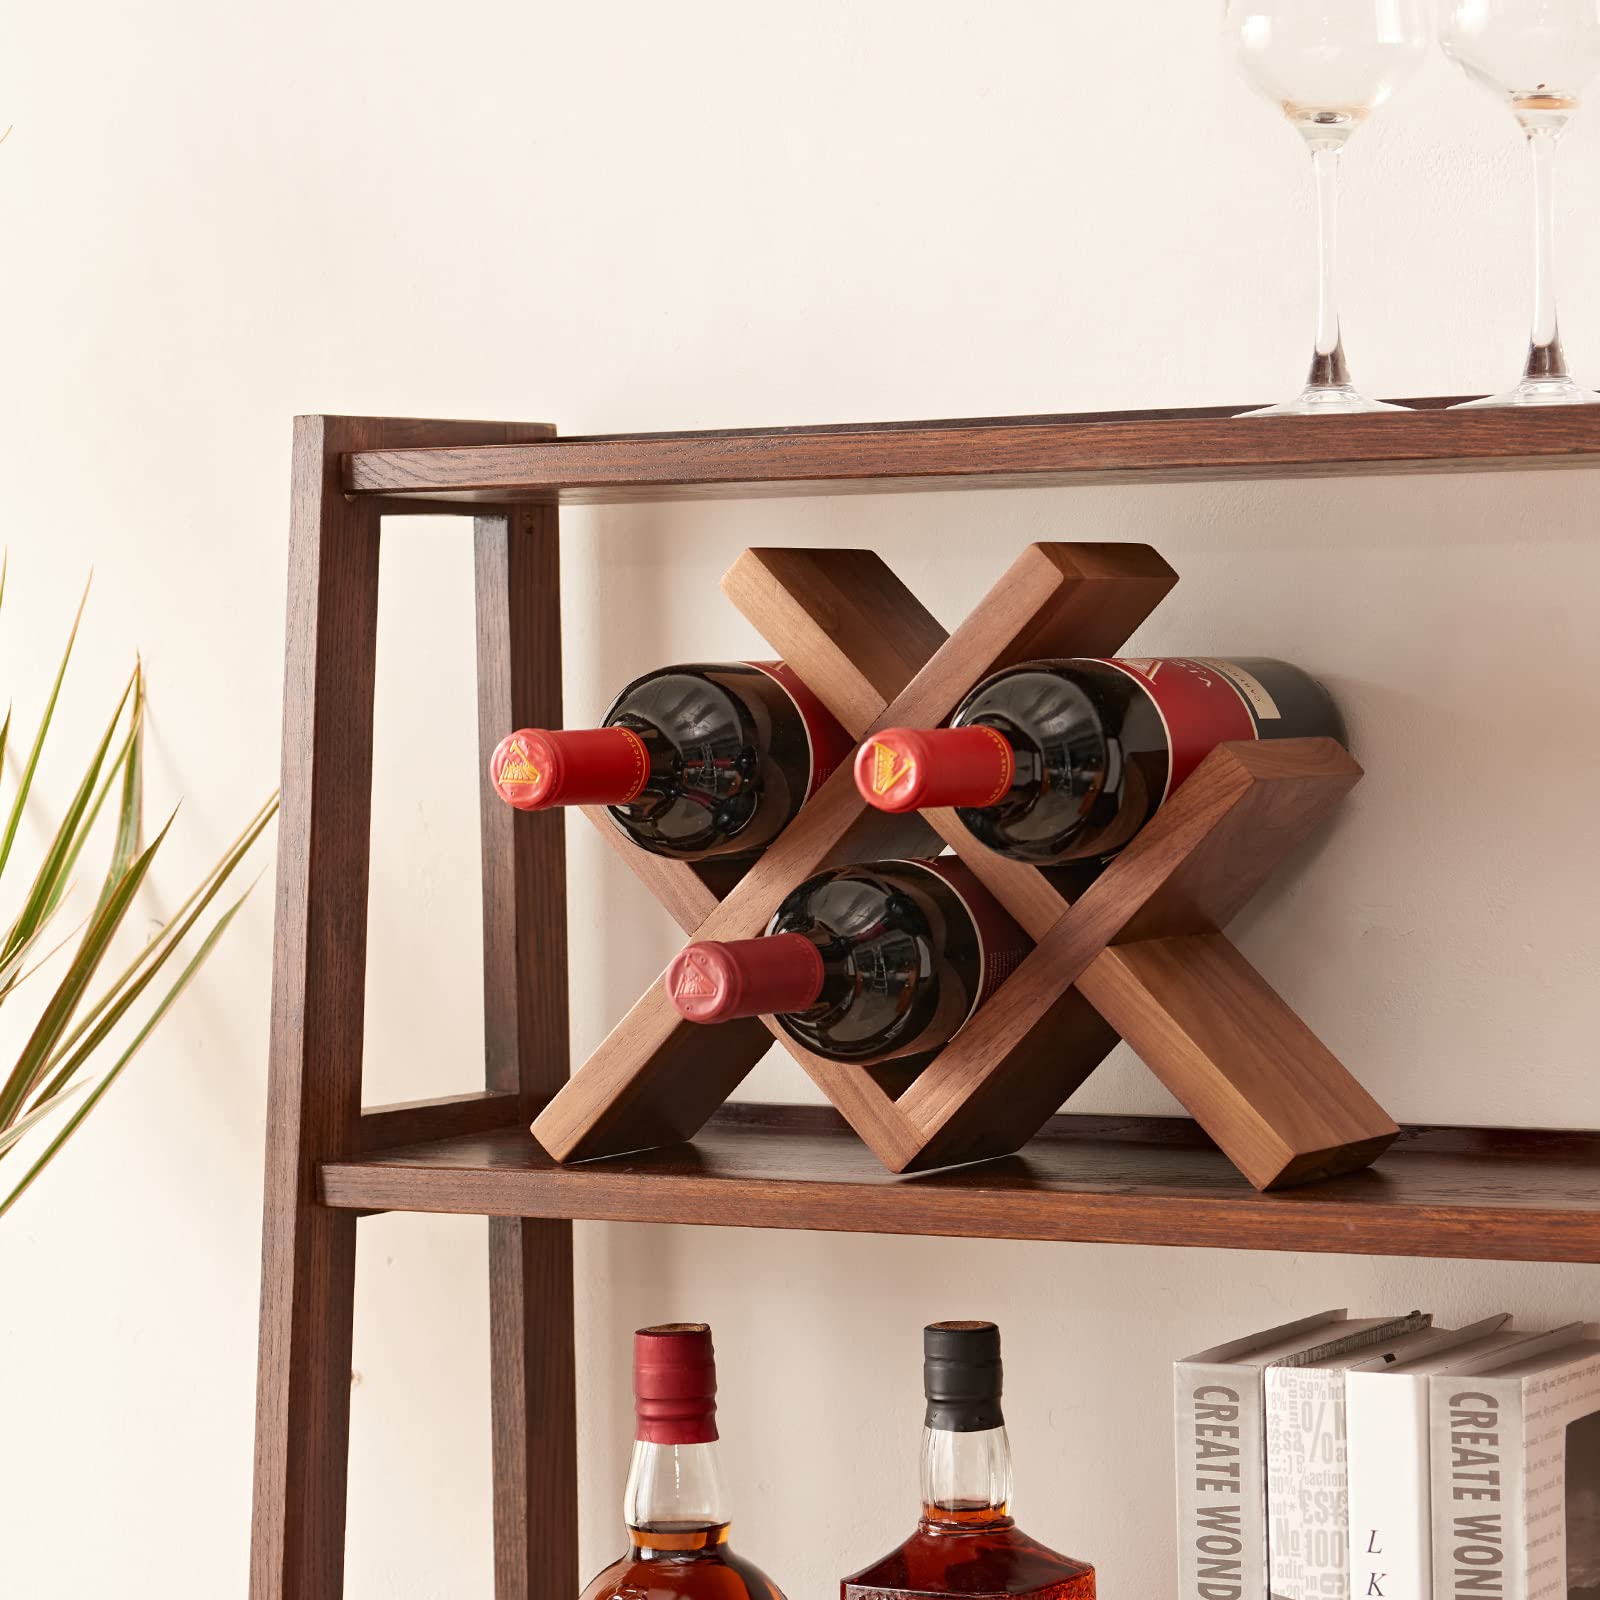 TRWISWDC Wine Rack Countertop Oak Wooden Wine Bottle Holder Rustic Free Standing Wine Storage Racks for Tabletop, Hutches and Display Cabinets - No Assembly Required (Walnut)